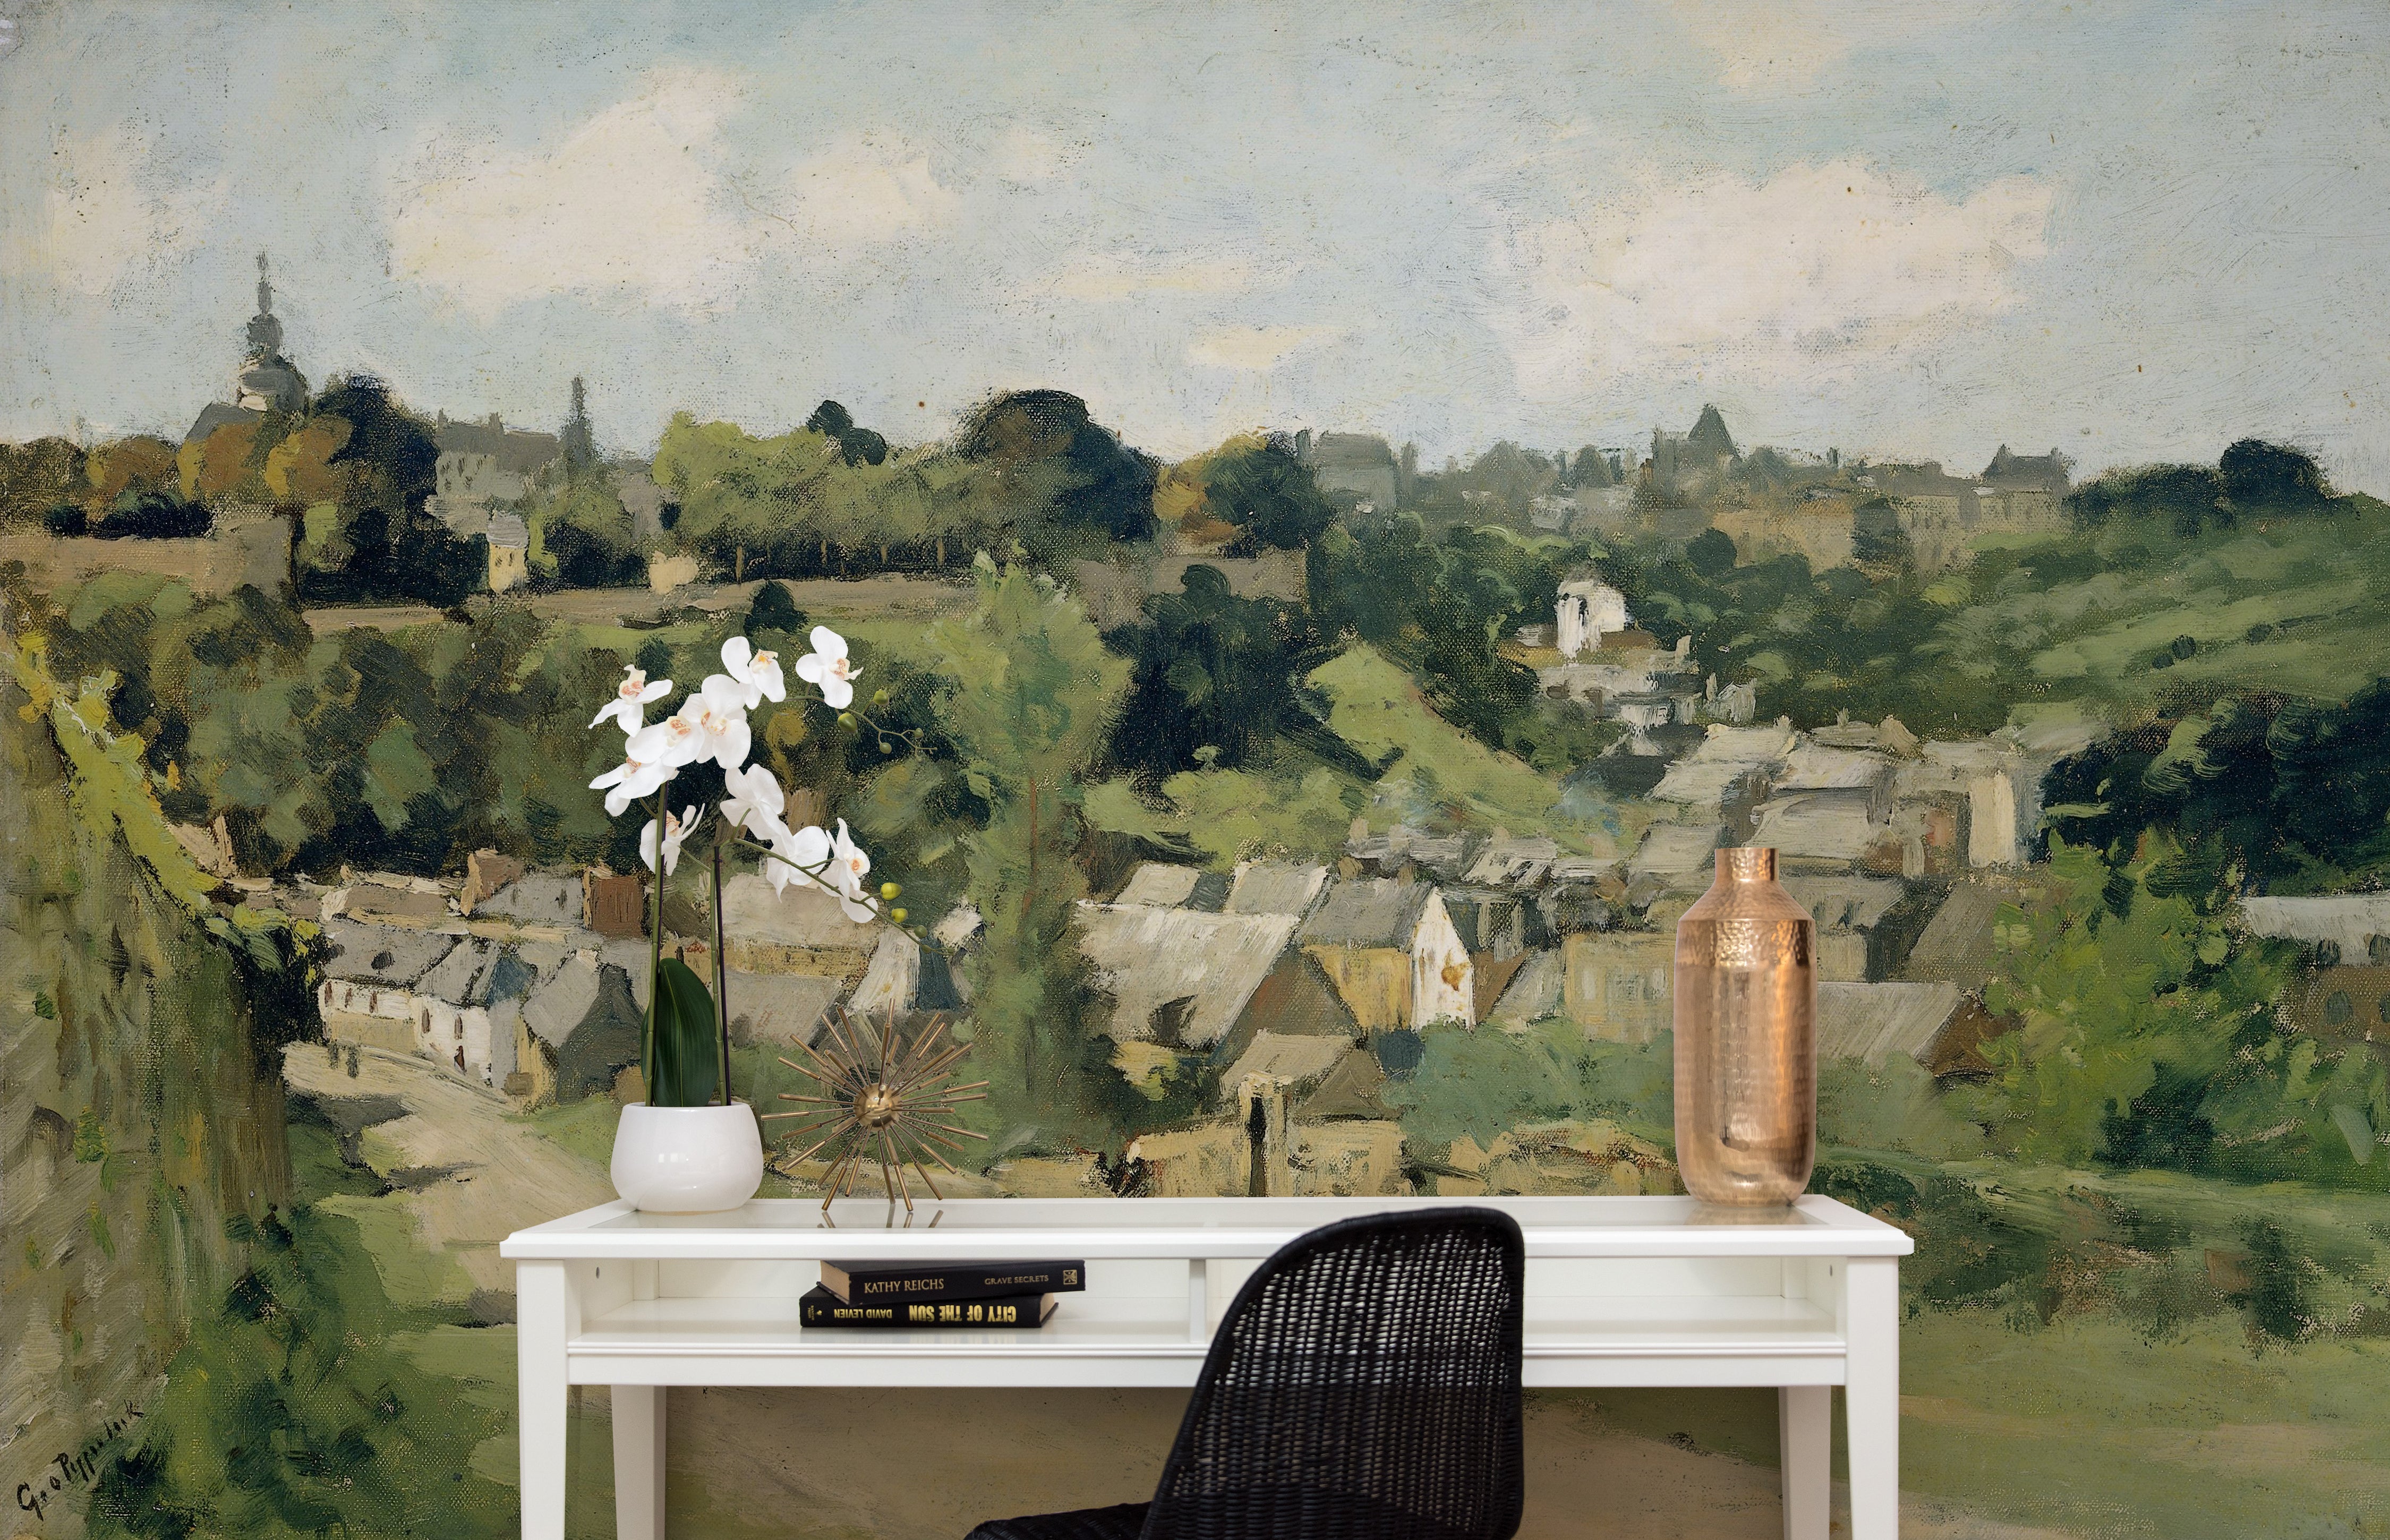 Elegant office setup featuring a 'Views - Vintage Wall Mural' that depicts a panoramic rural landscape. The detailed artwork, displayed behind a simple white desk, contrasts beautifully with modern decor elements like a sleek black chair and a decorative copper vase.